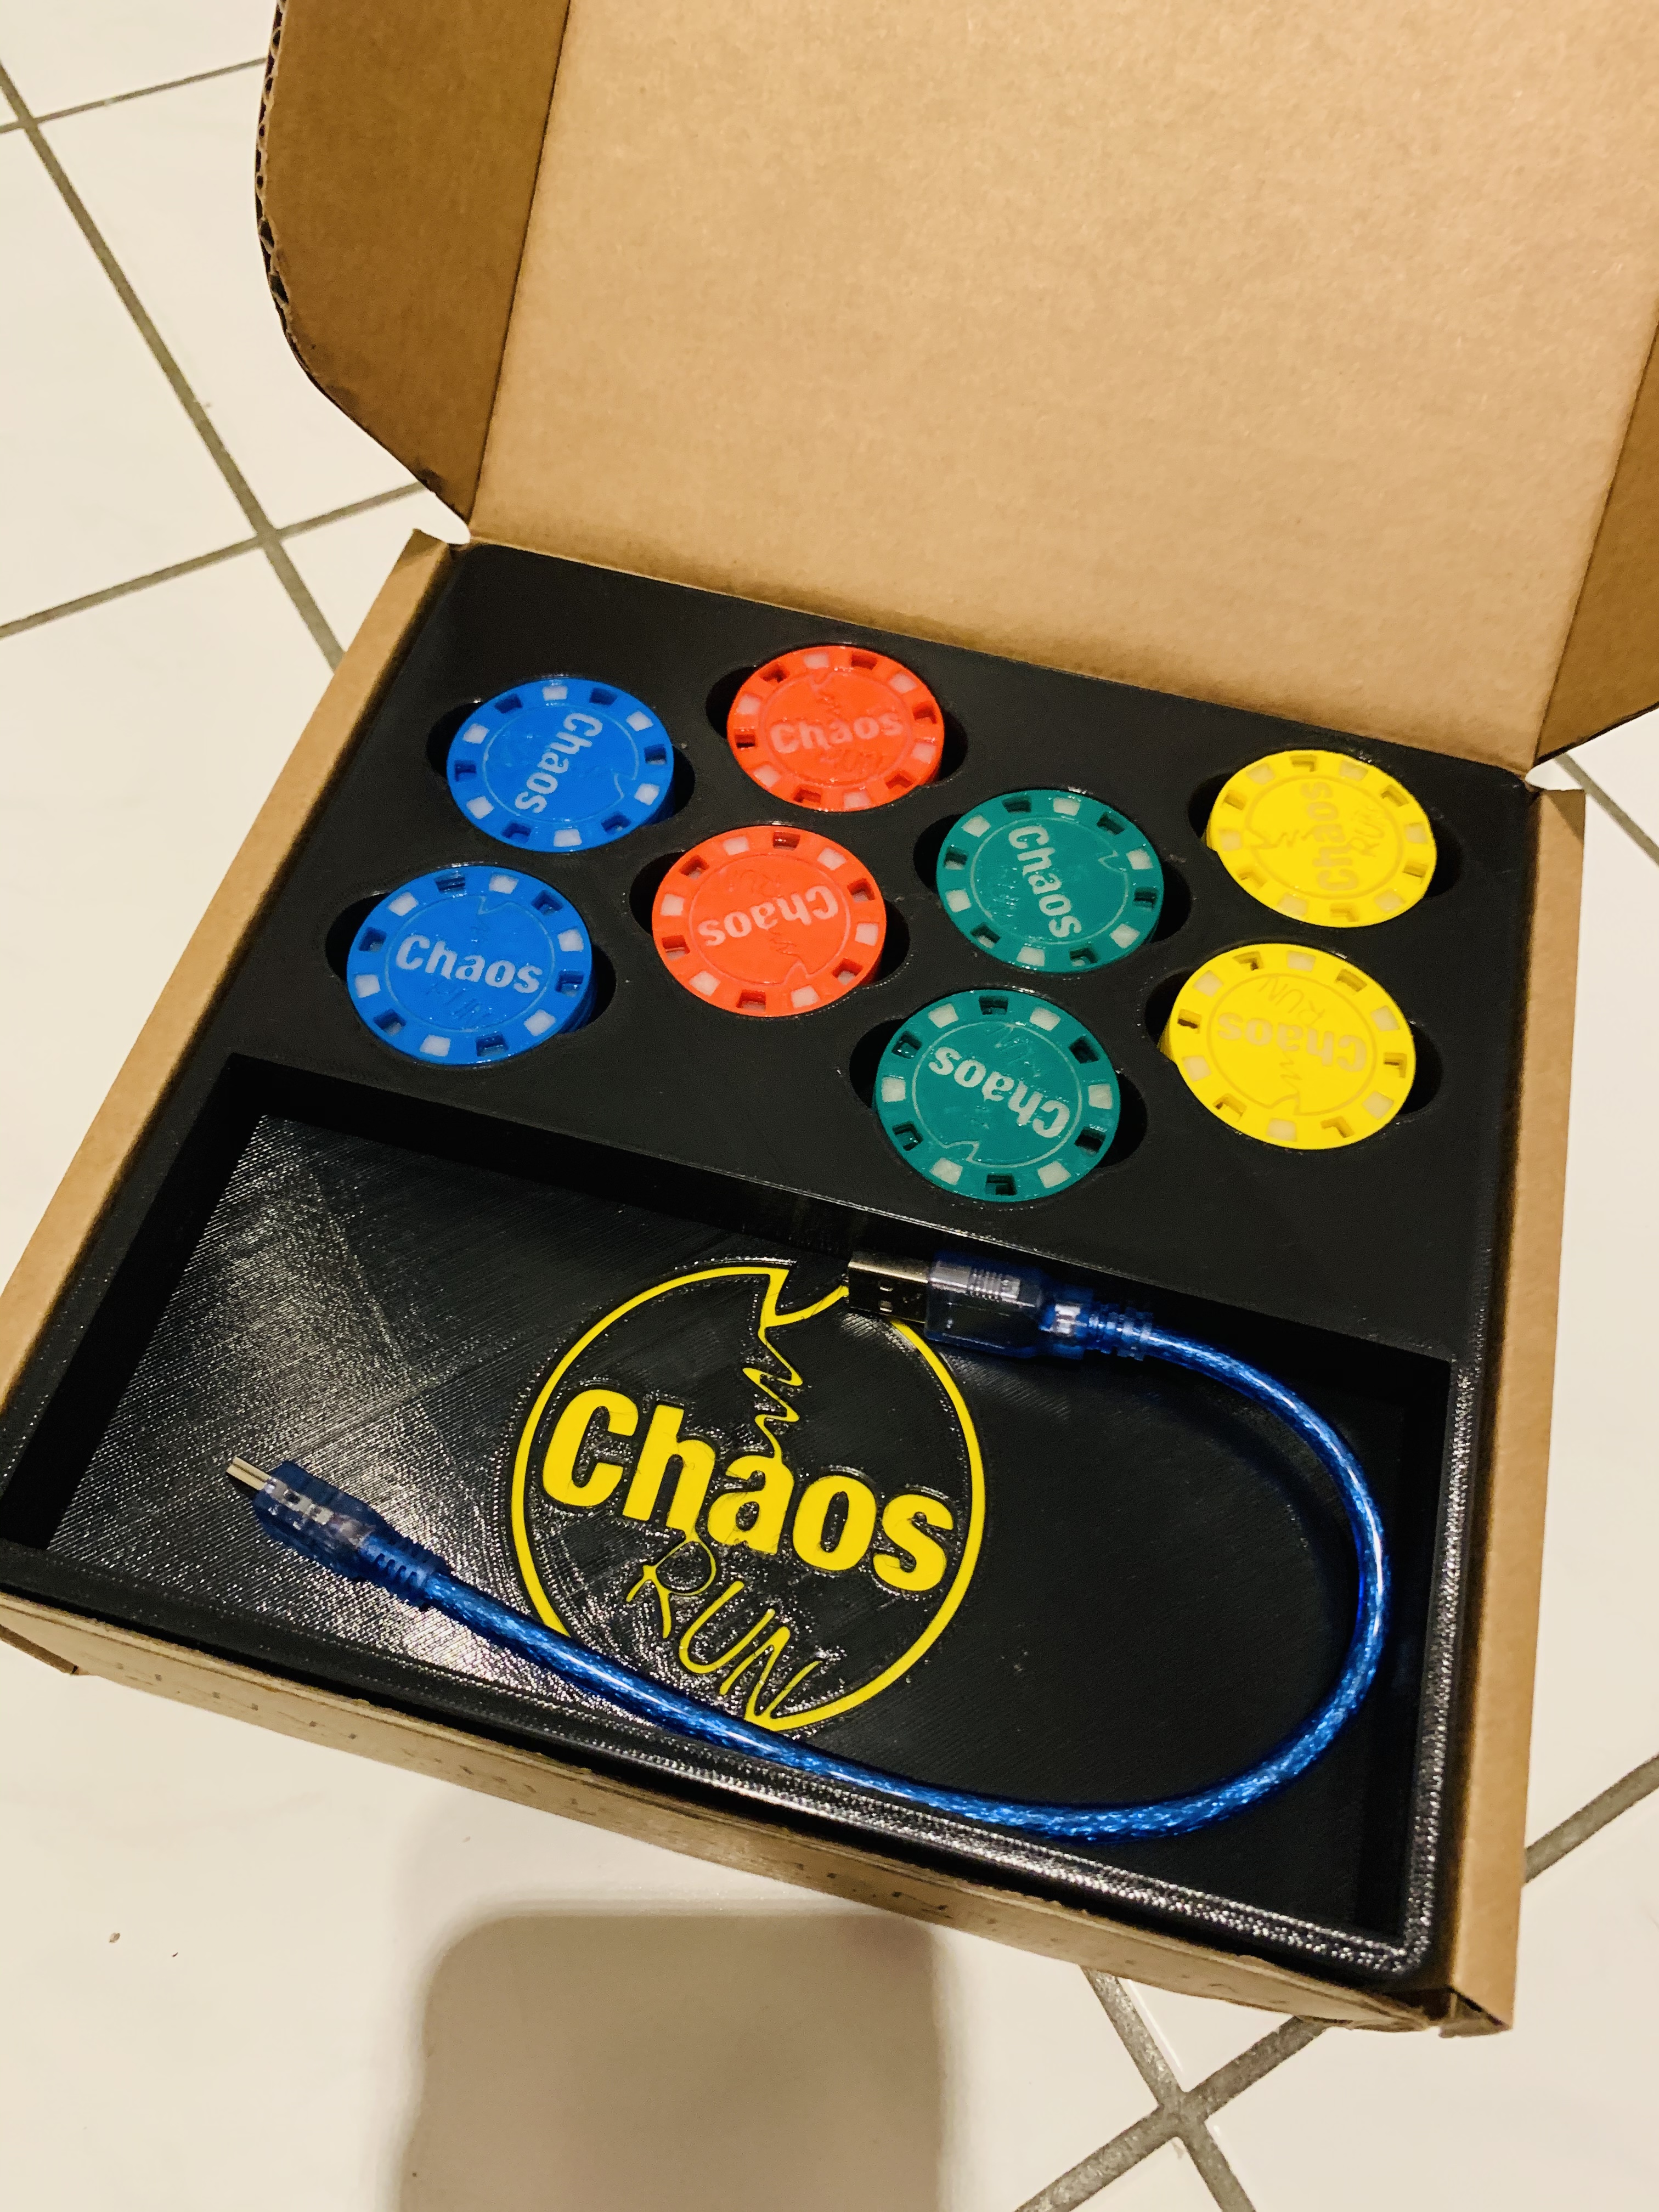 Box for the  Chaos-Run game